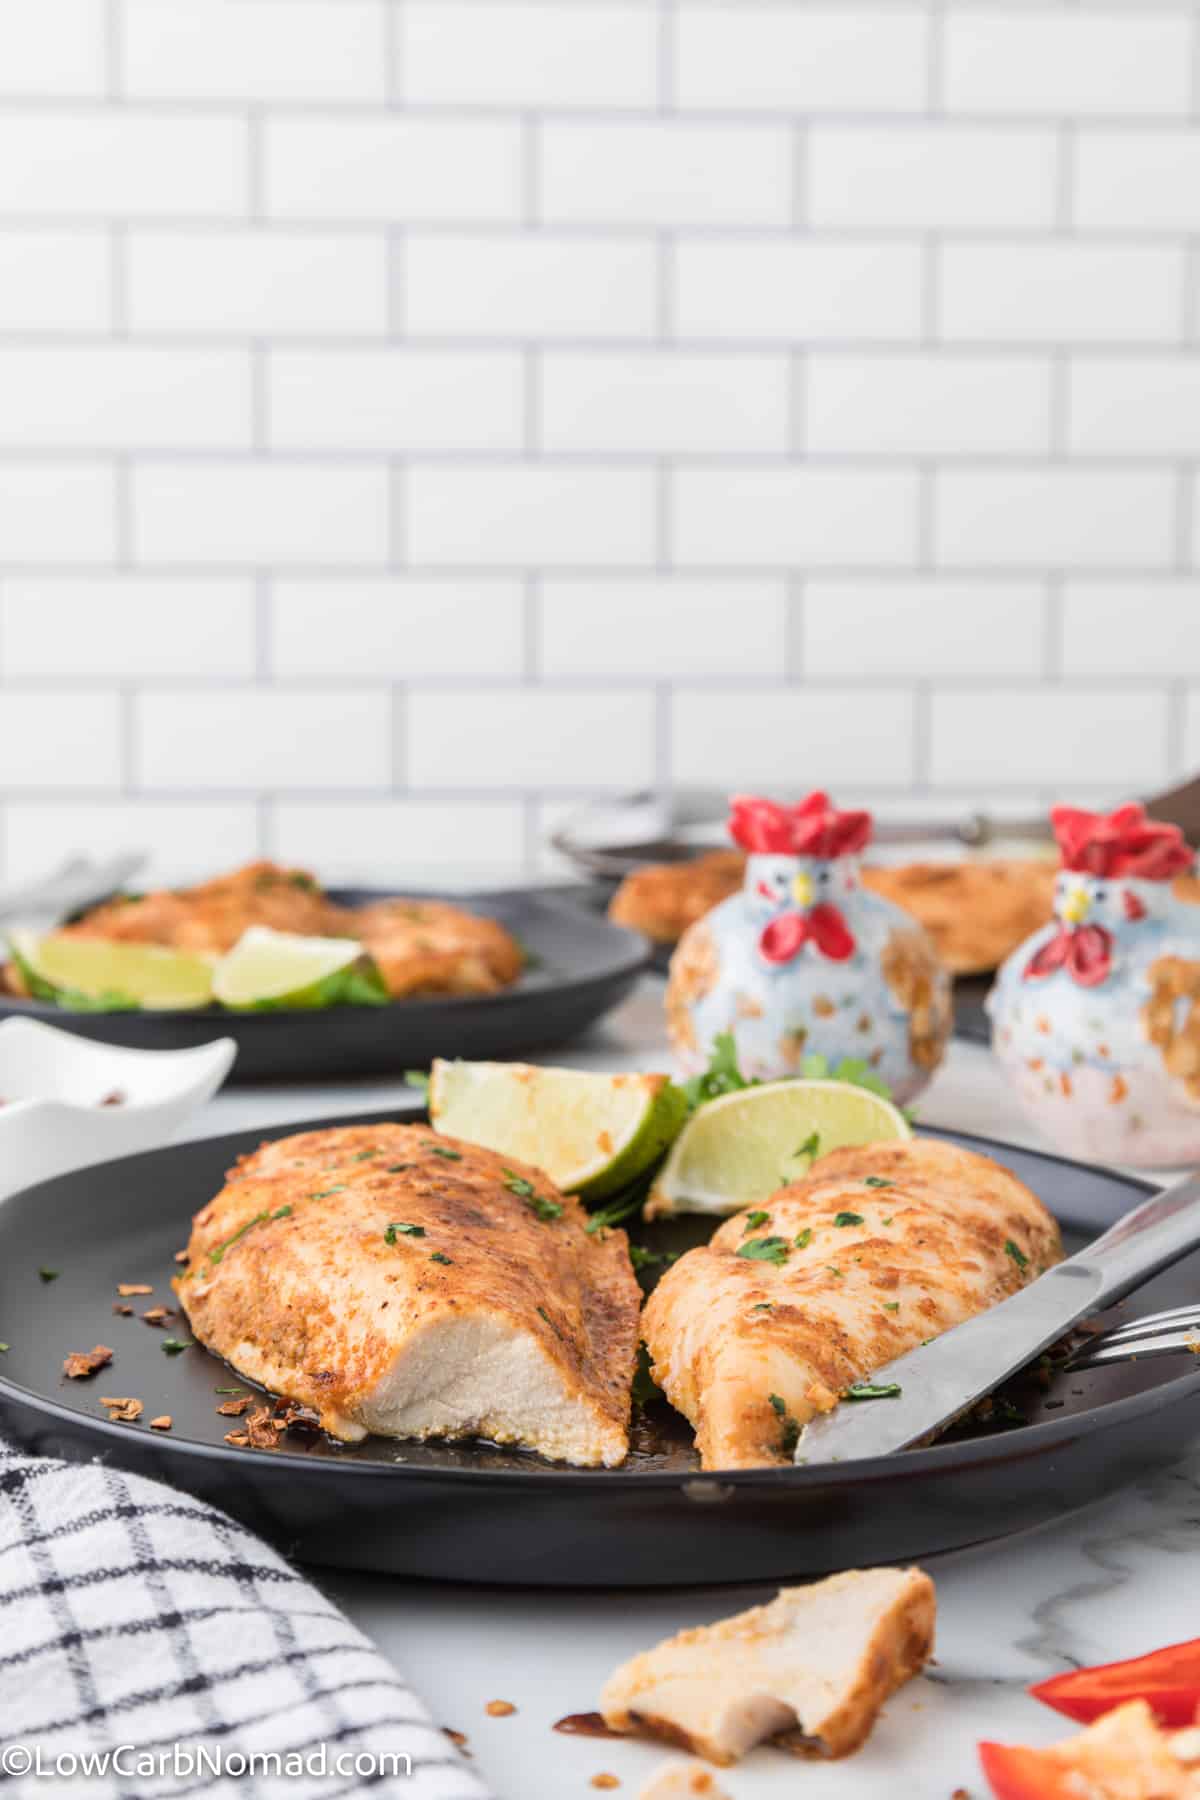 Baked Chili Lime Chicken Recipe